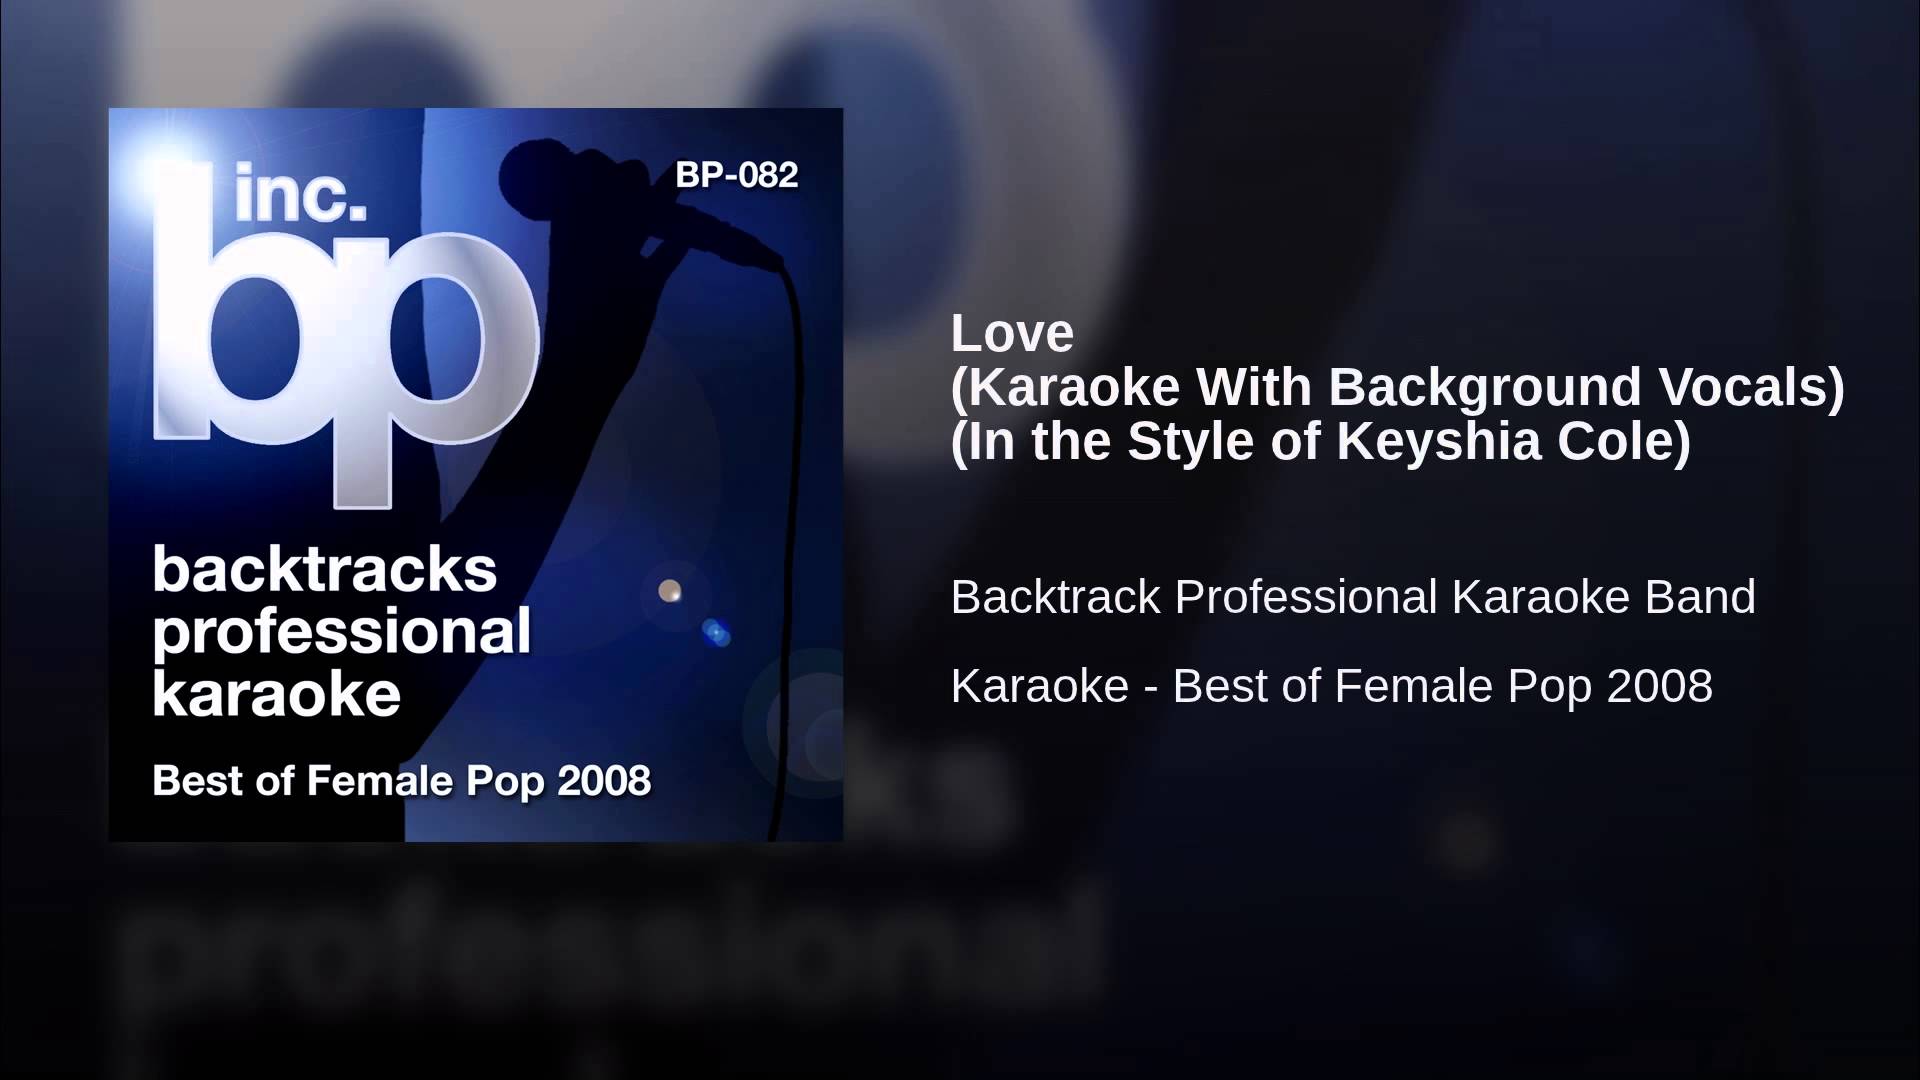 Love (Karaoke With Background Vocals) (In the Style of Keyshia Cole